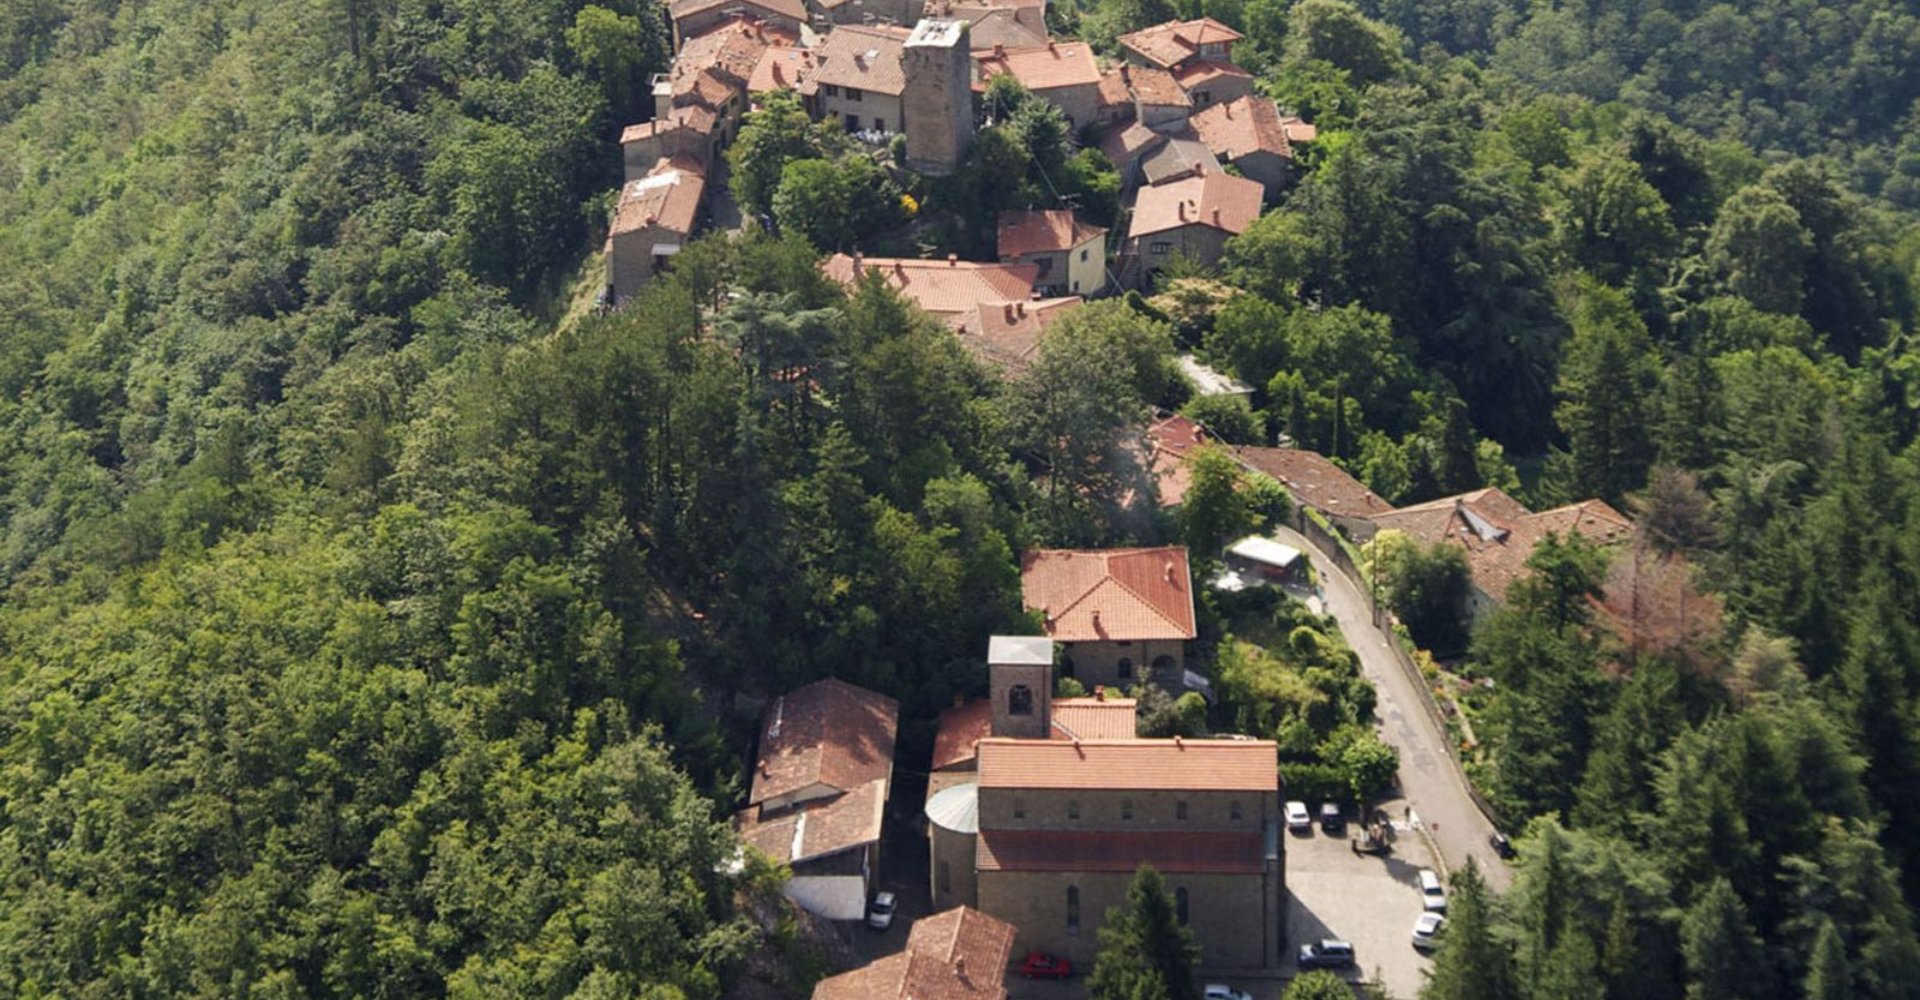 Among the villages of the Tuscan side in Casentino